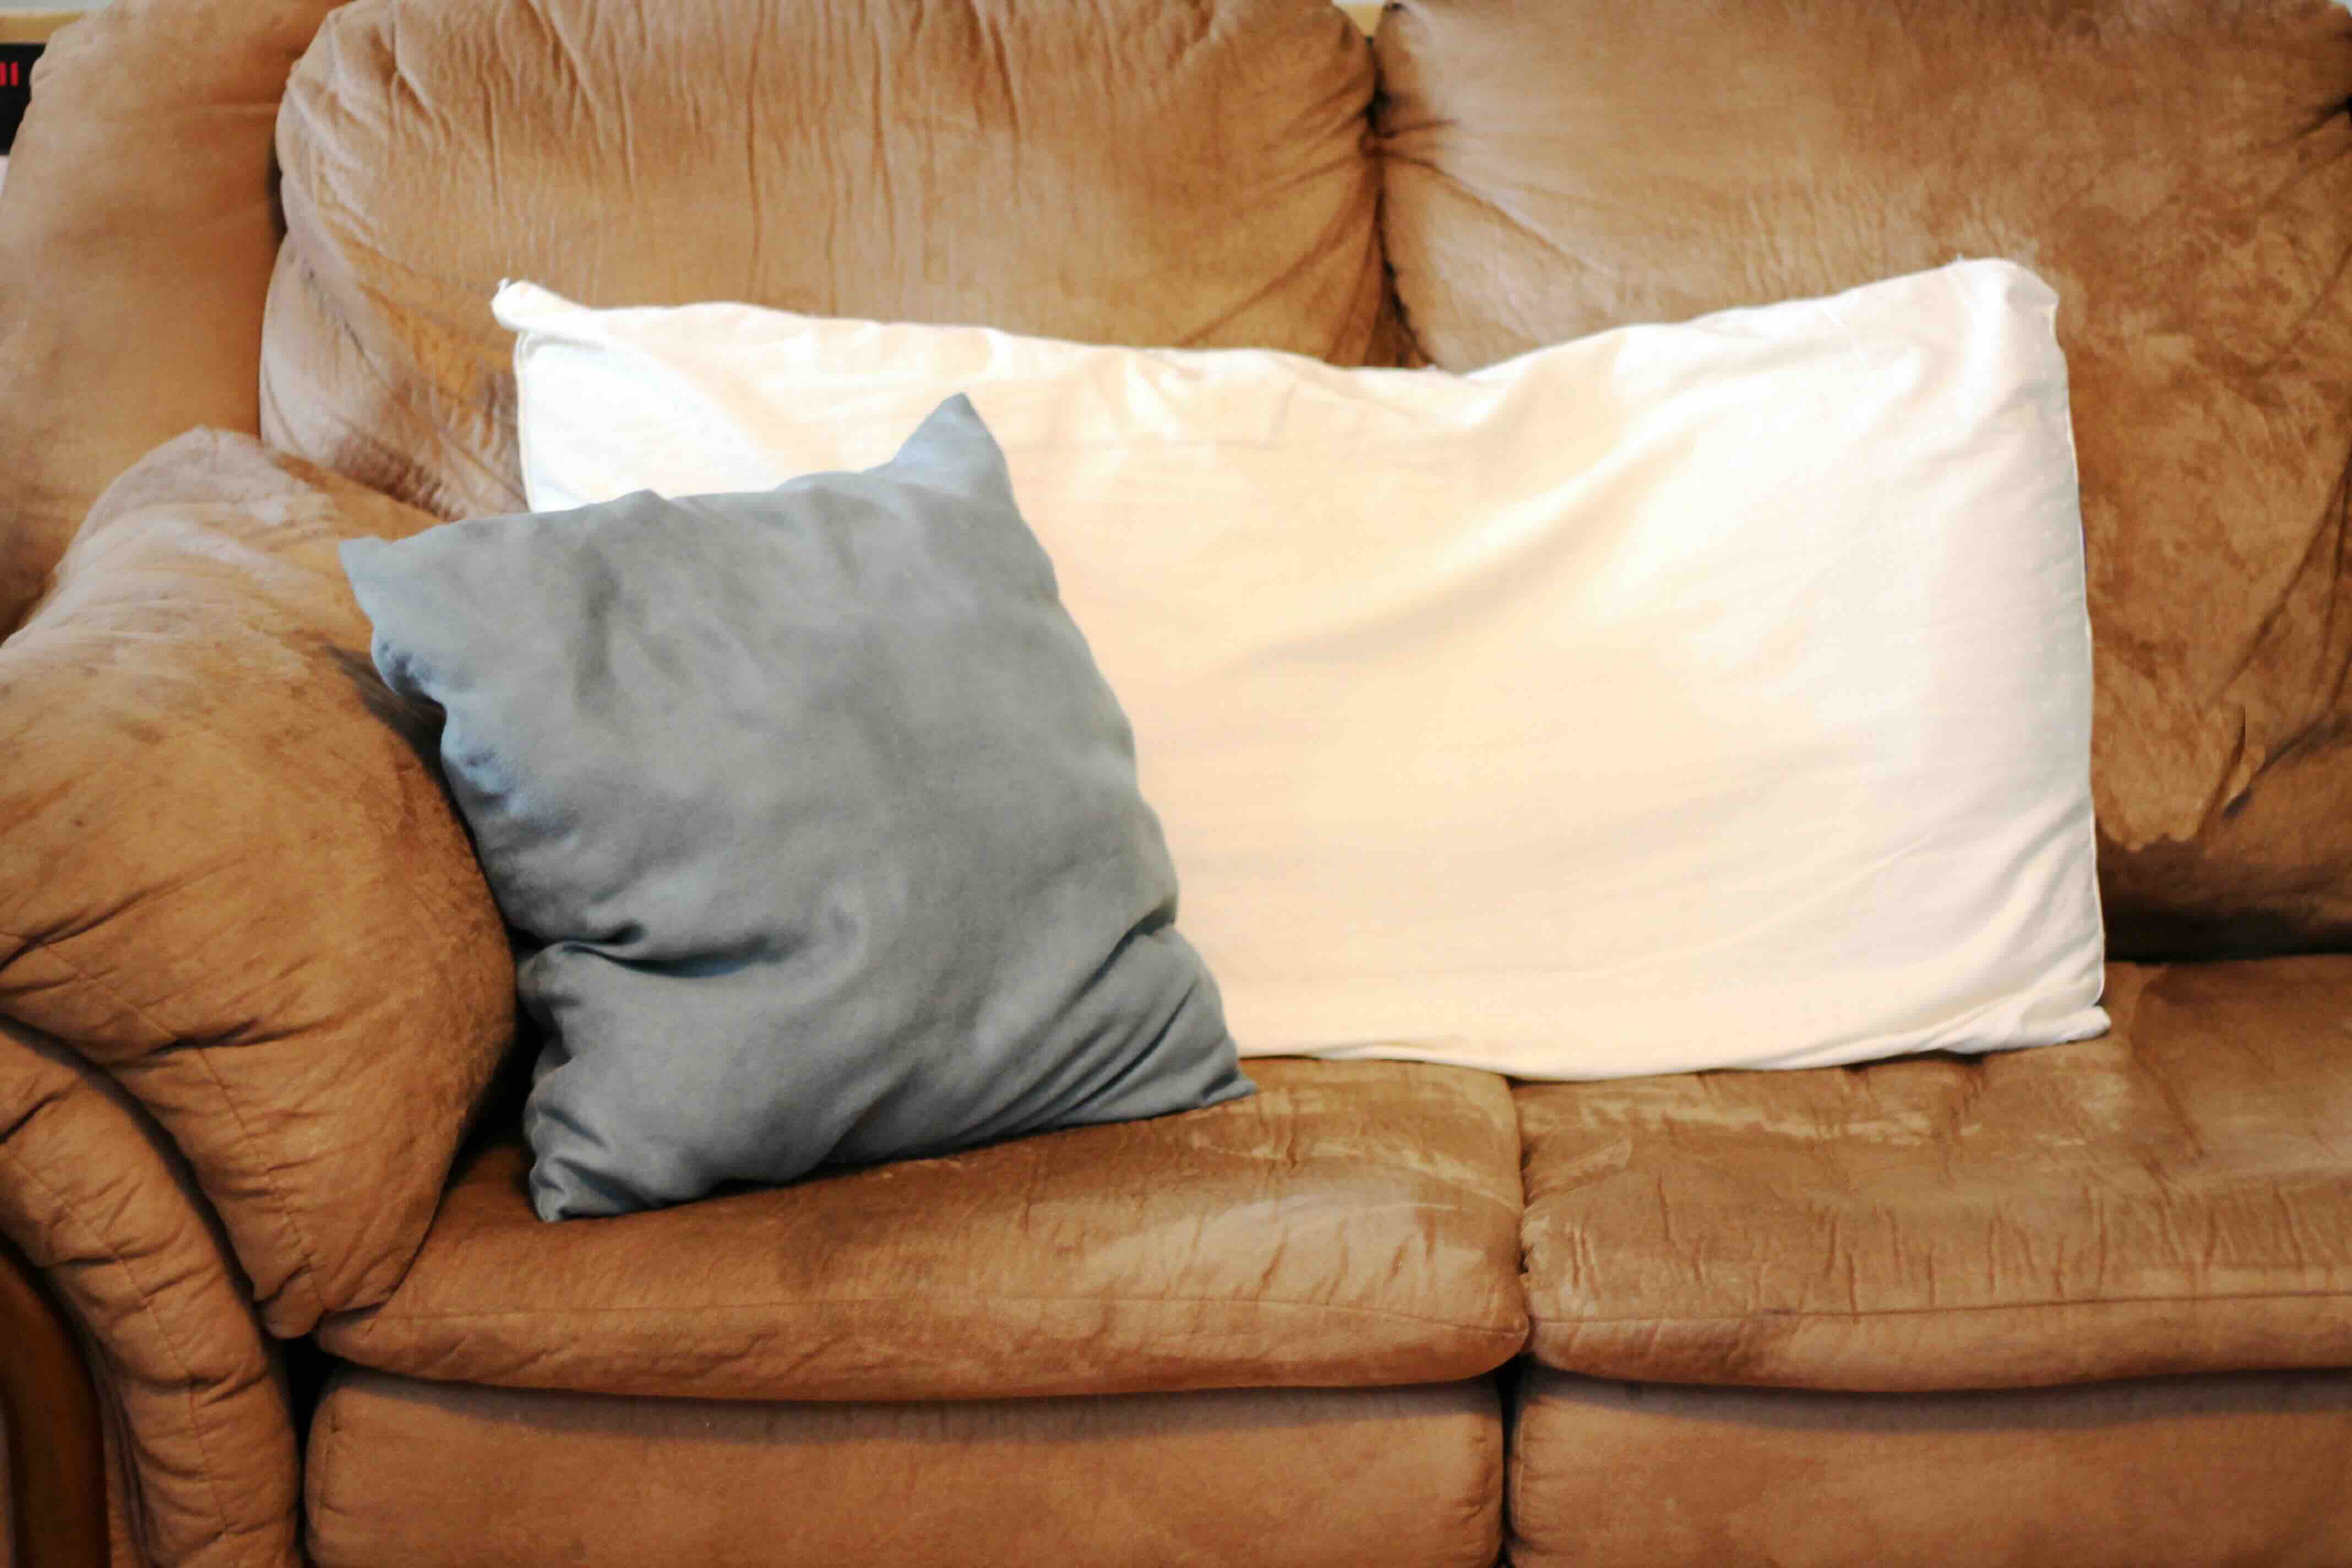 How To Remove Mold From Pillows